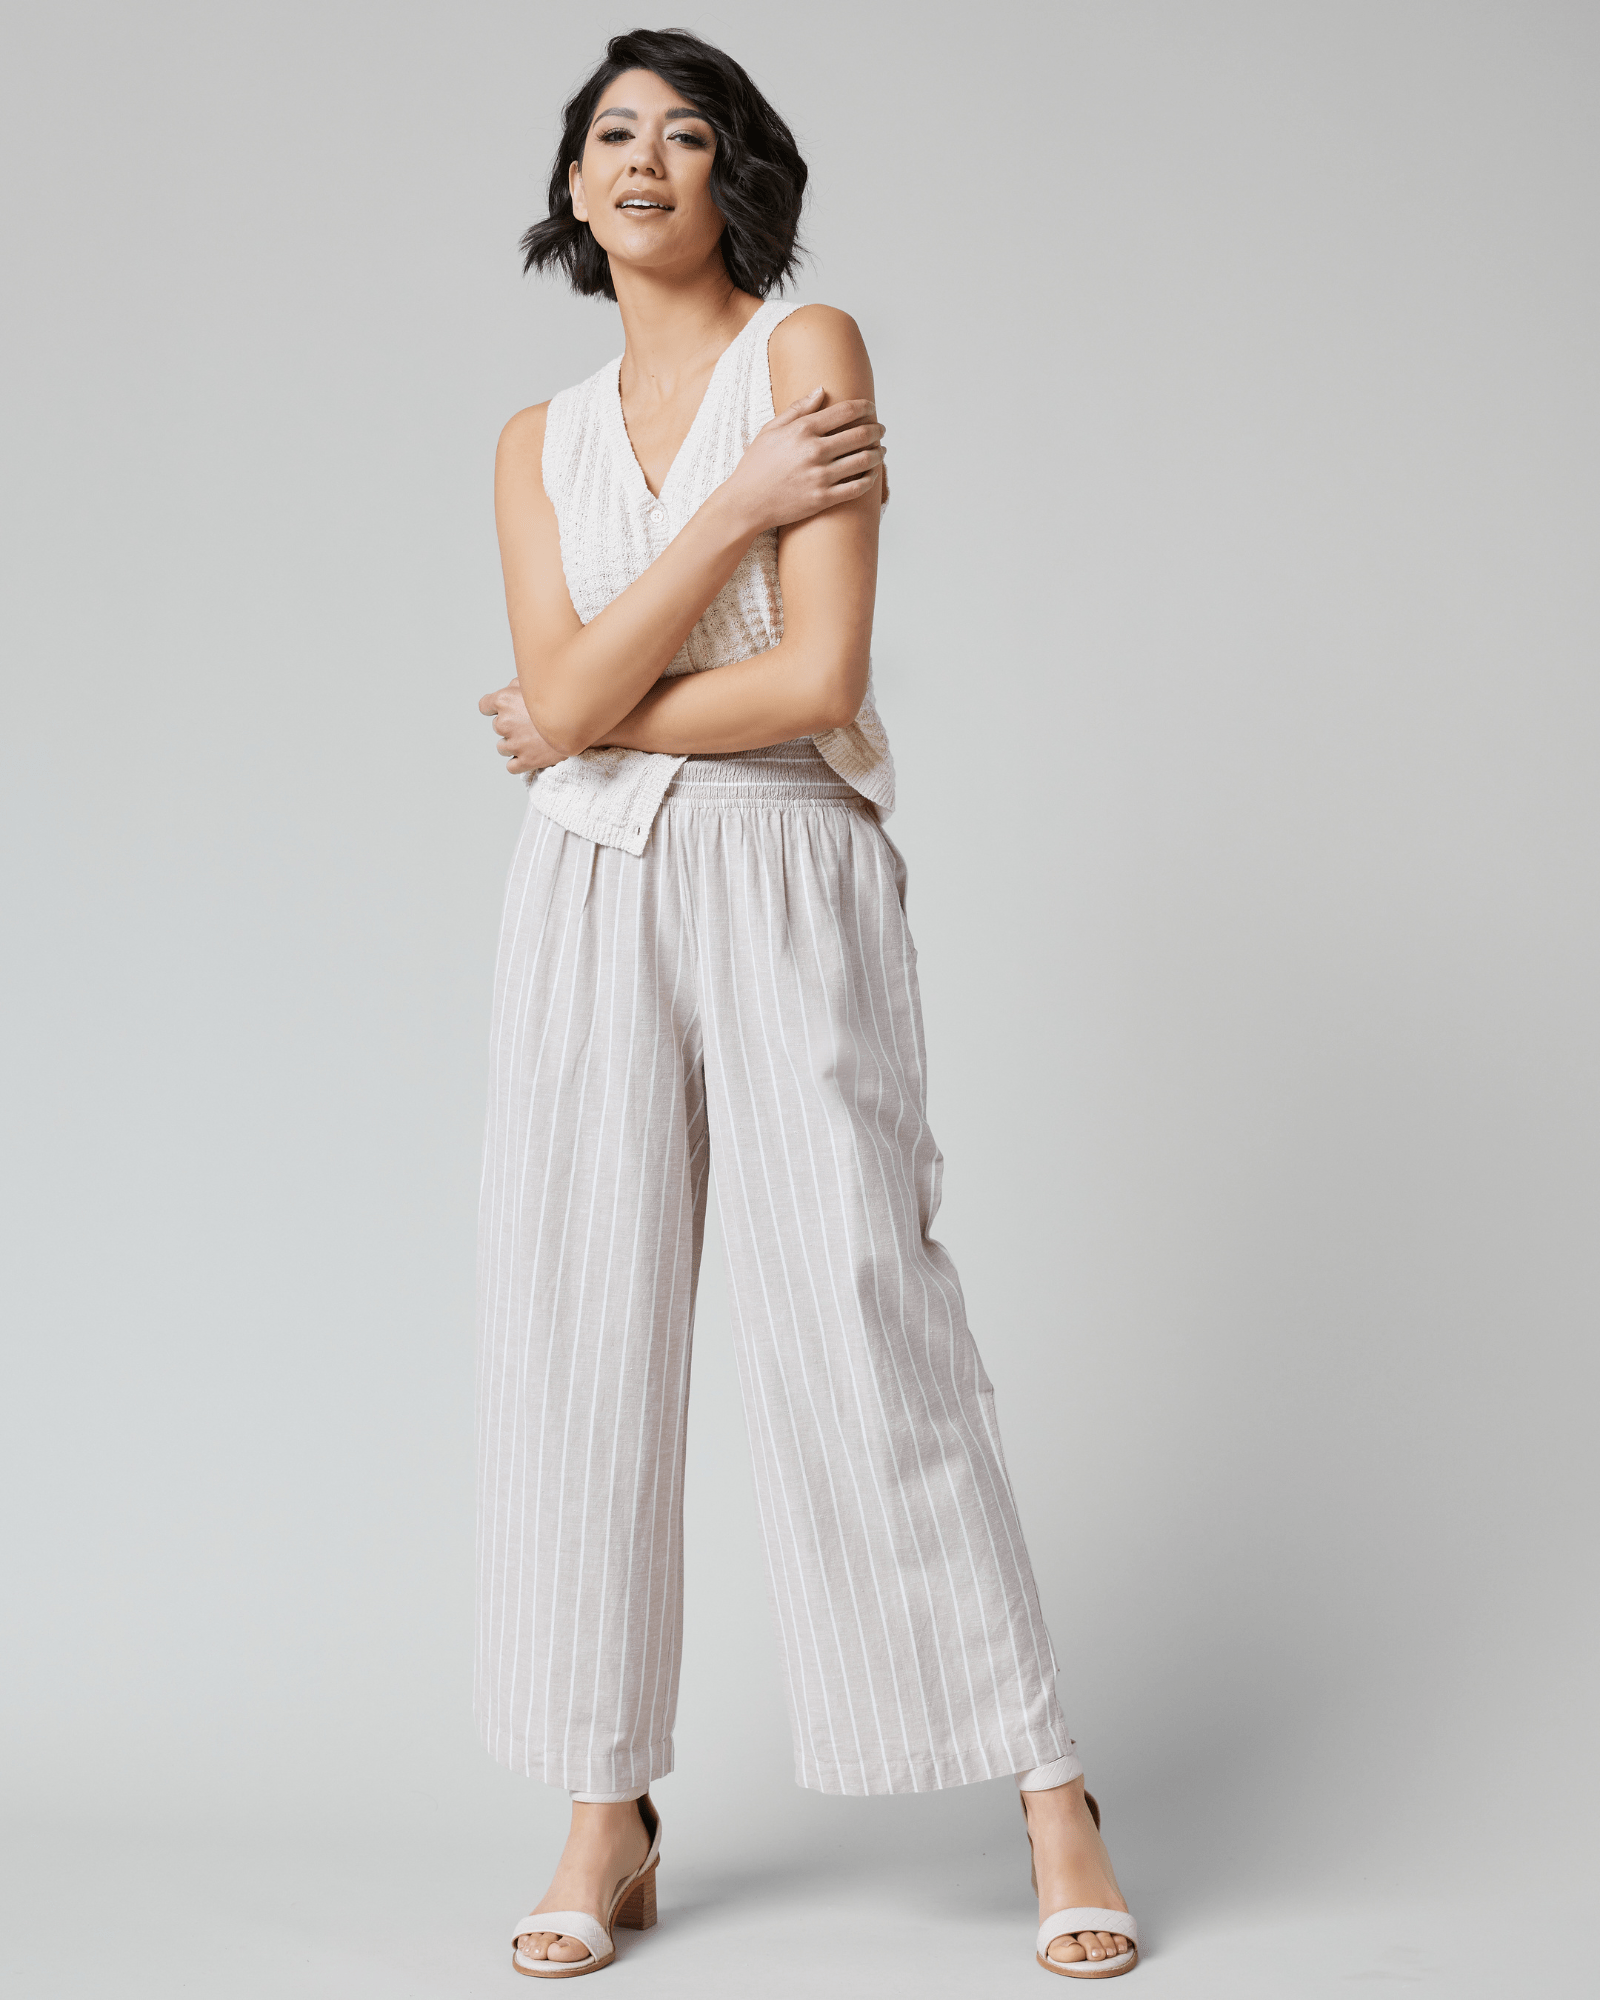 Woman in tan and white vertical striped pants